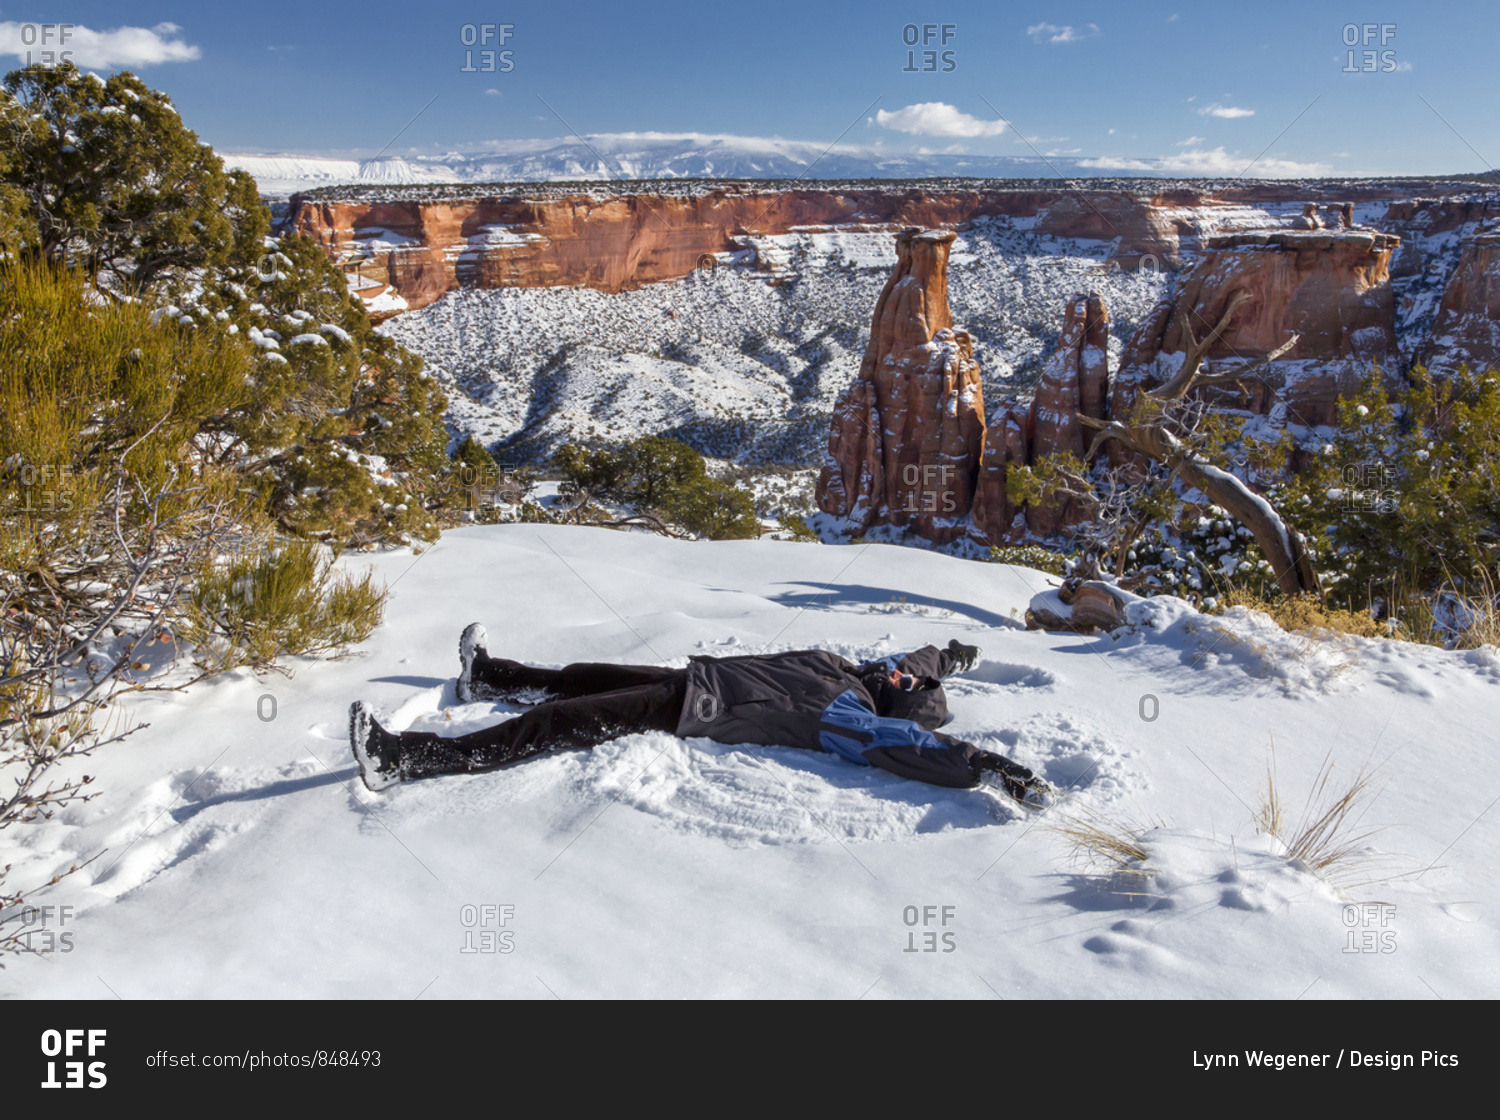 A woman makes a snow angel in the snow in front of the Colorado National Monument